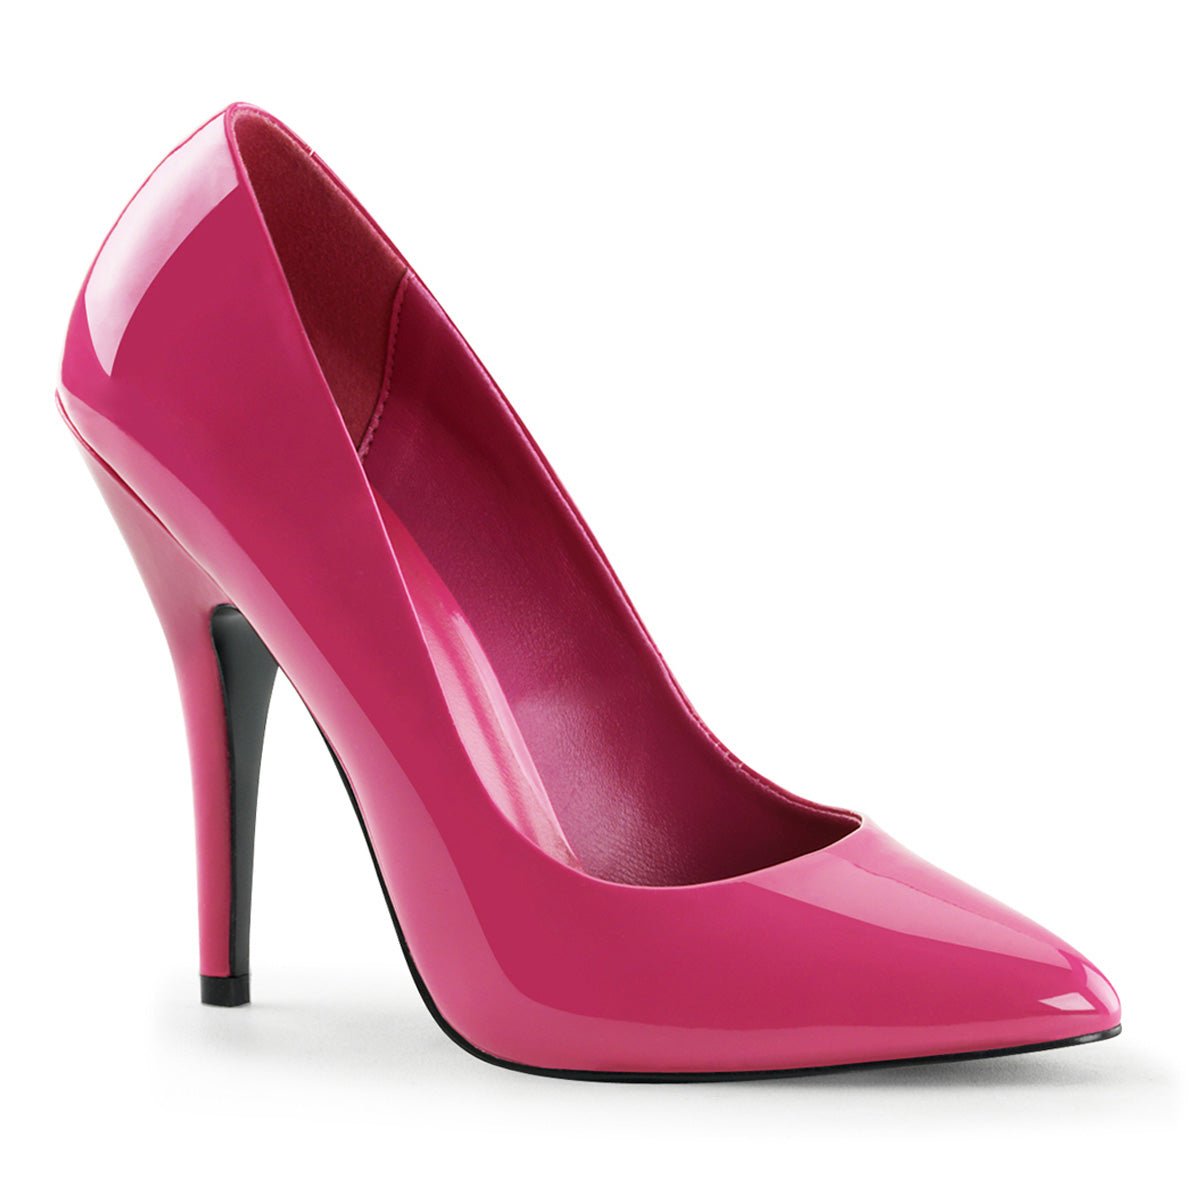 Clearance Pleaser Seduce 420 Hot Pink Size 4UK/7USA - From Clearance Sold By Alternative Footwear